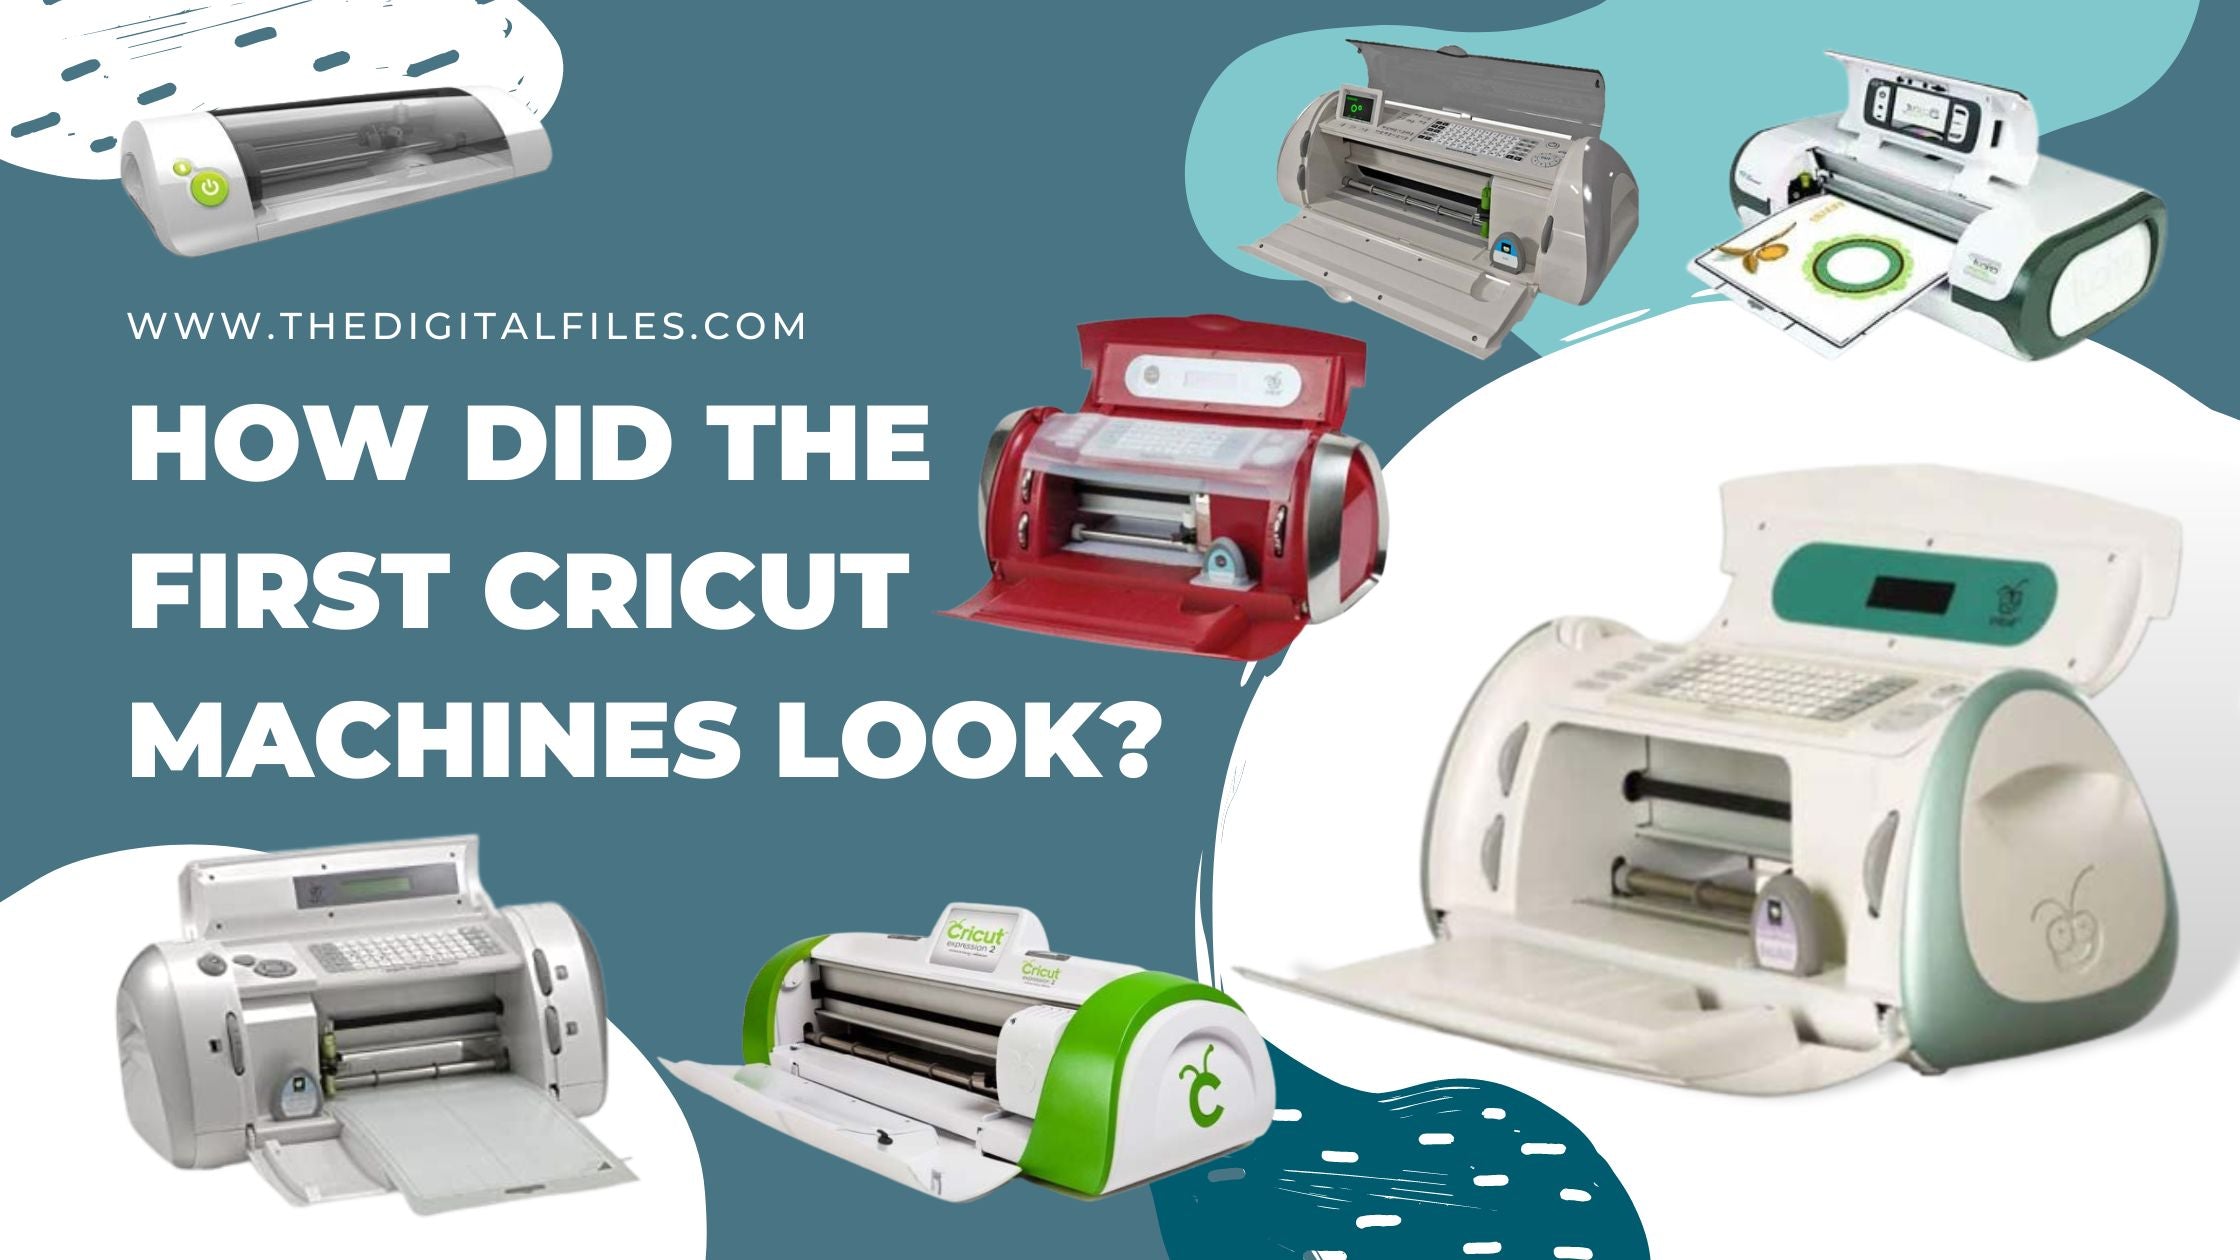 Best Vinyl Cutter for Crafters: Differences Between Cricut and Silhouette  Cameo - Stahls' Blog